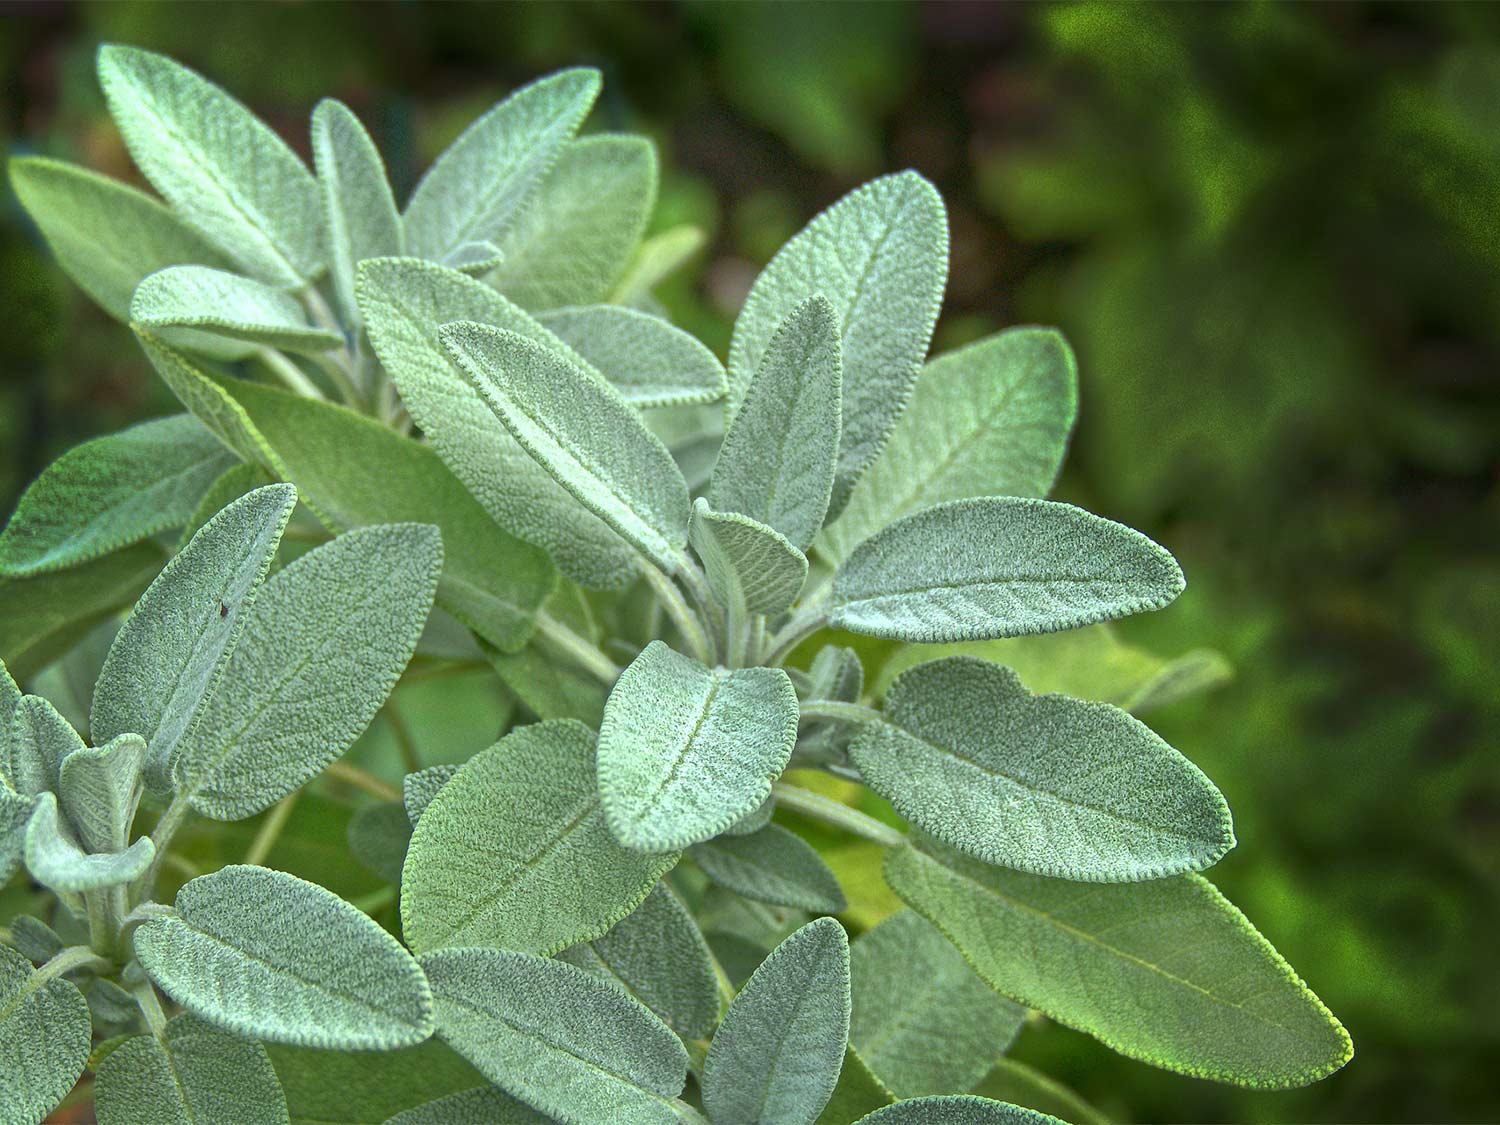 A sprig of sage plant growing lush and green.